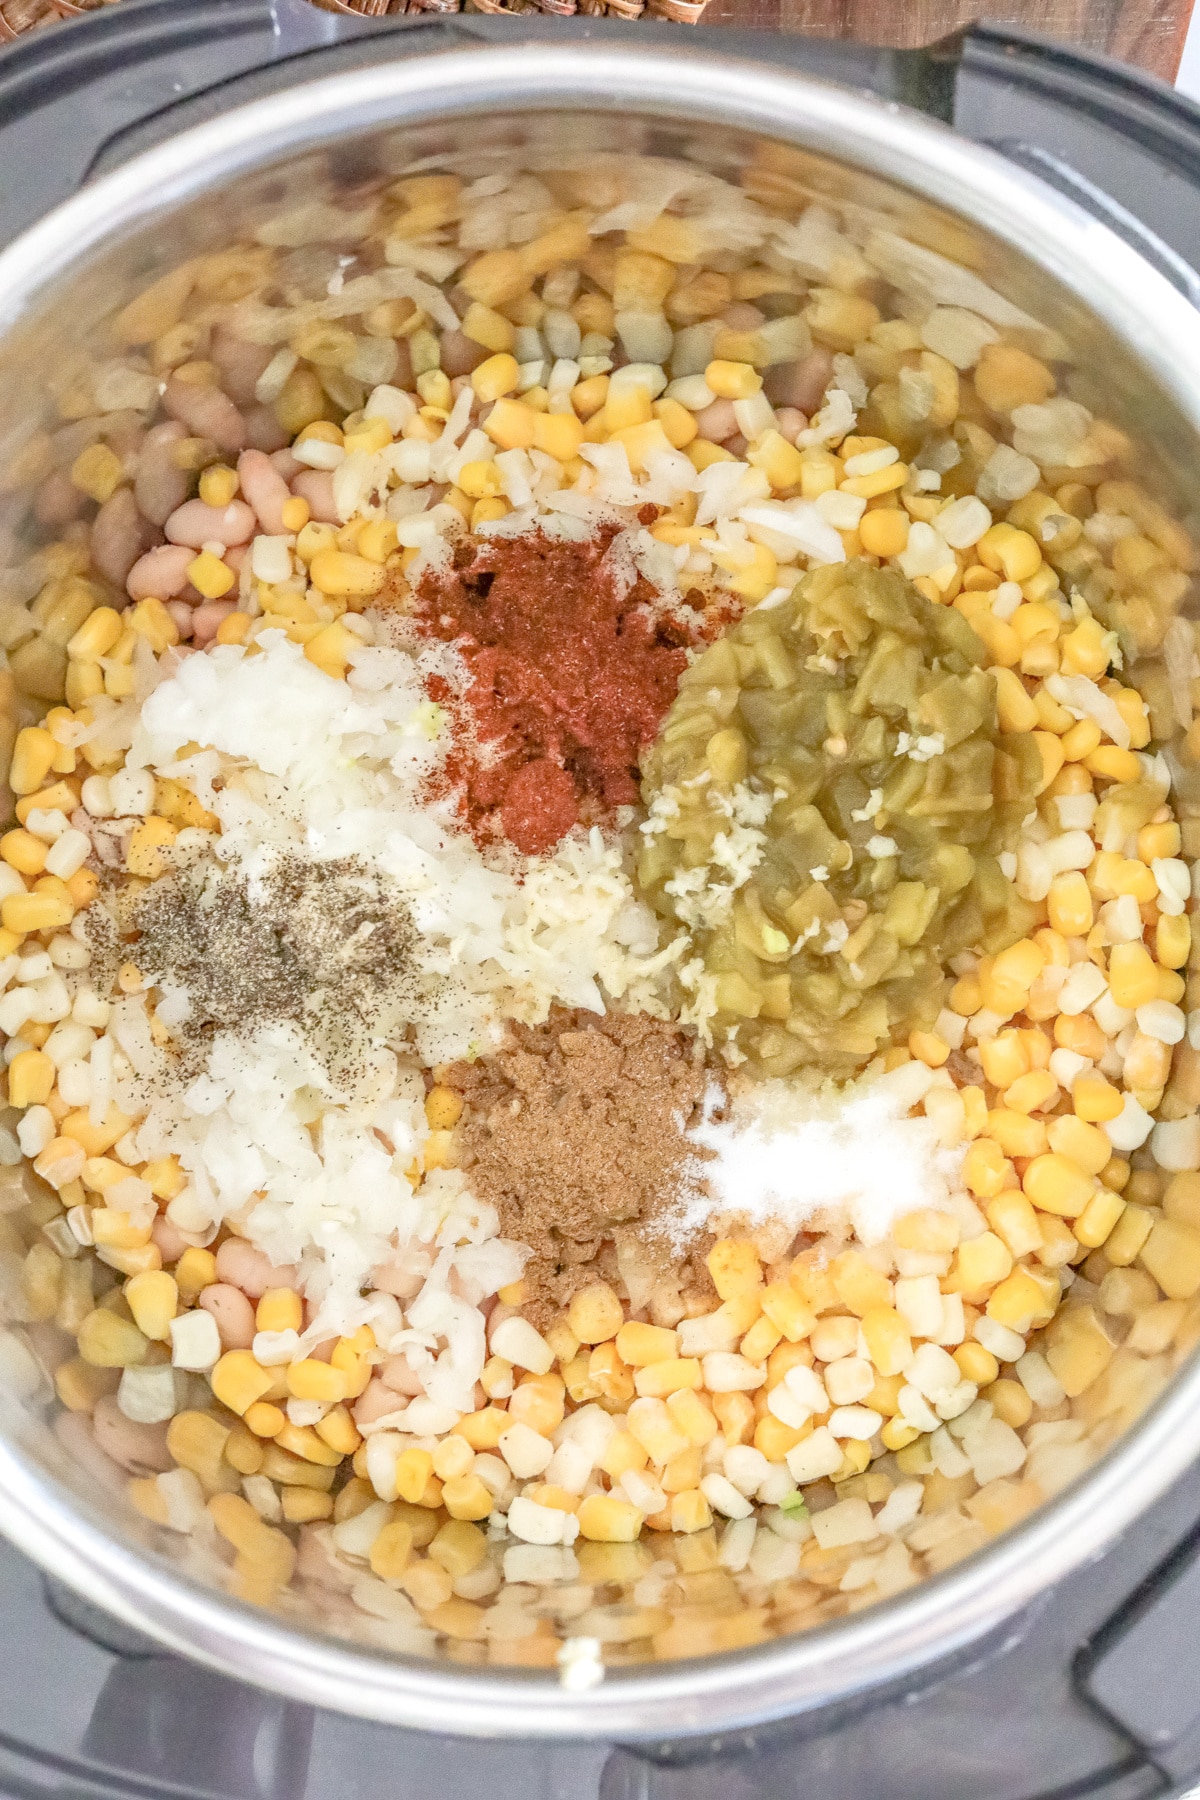 Add beans and veggies with spices to instant pot